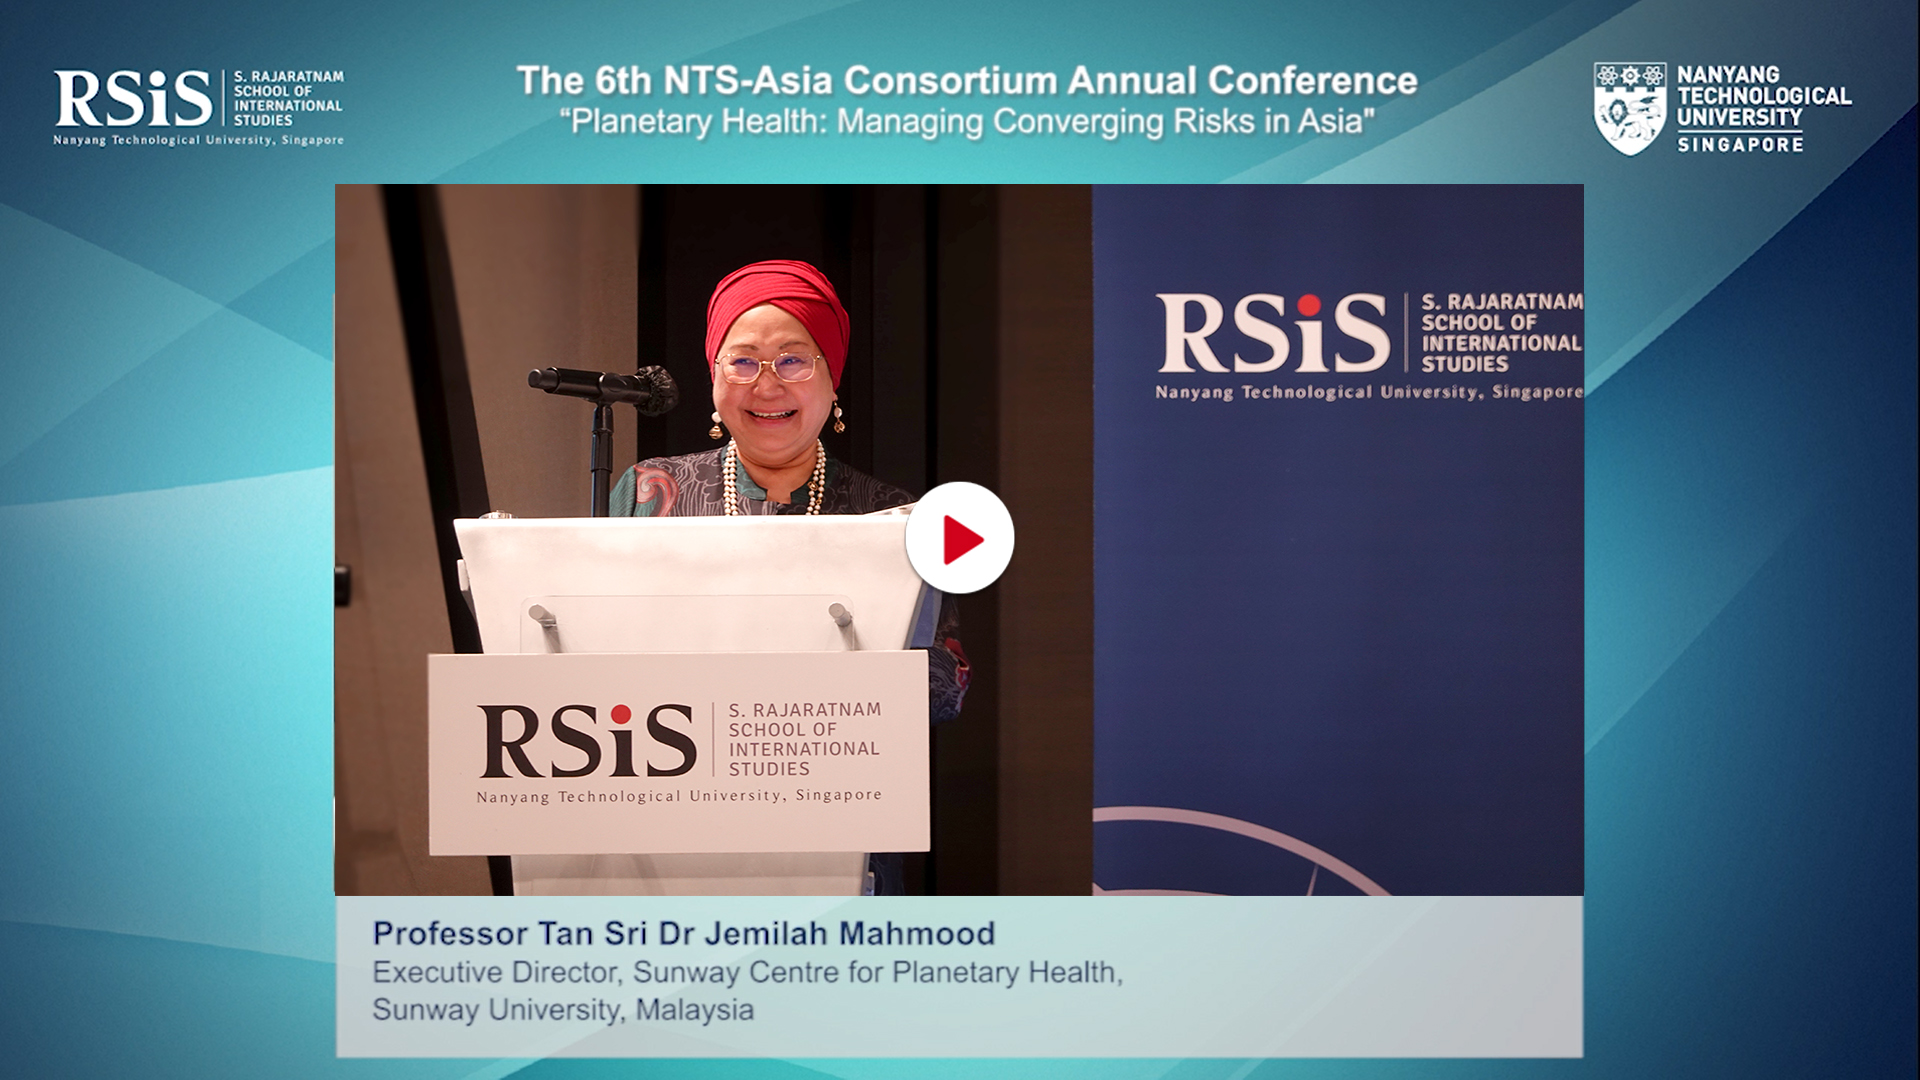 Professor Tan Sri Dr Jemilah Mahmood delivers a keynote address at the 6th NTS-Asia Consortium Conference on Wednesday, 6 April 2022, in Singapore